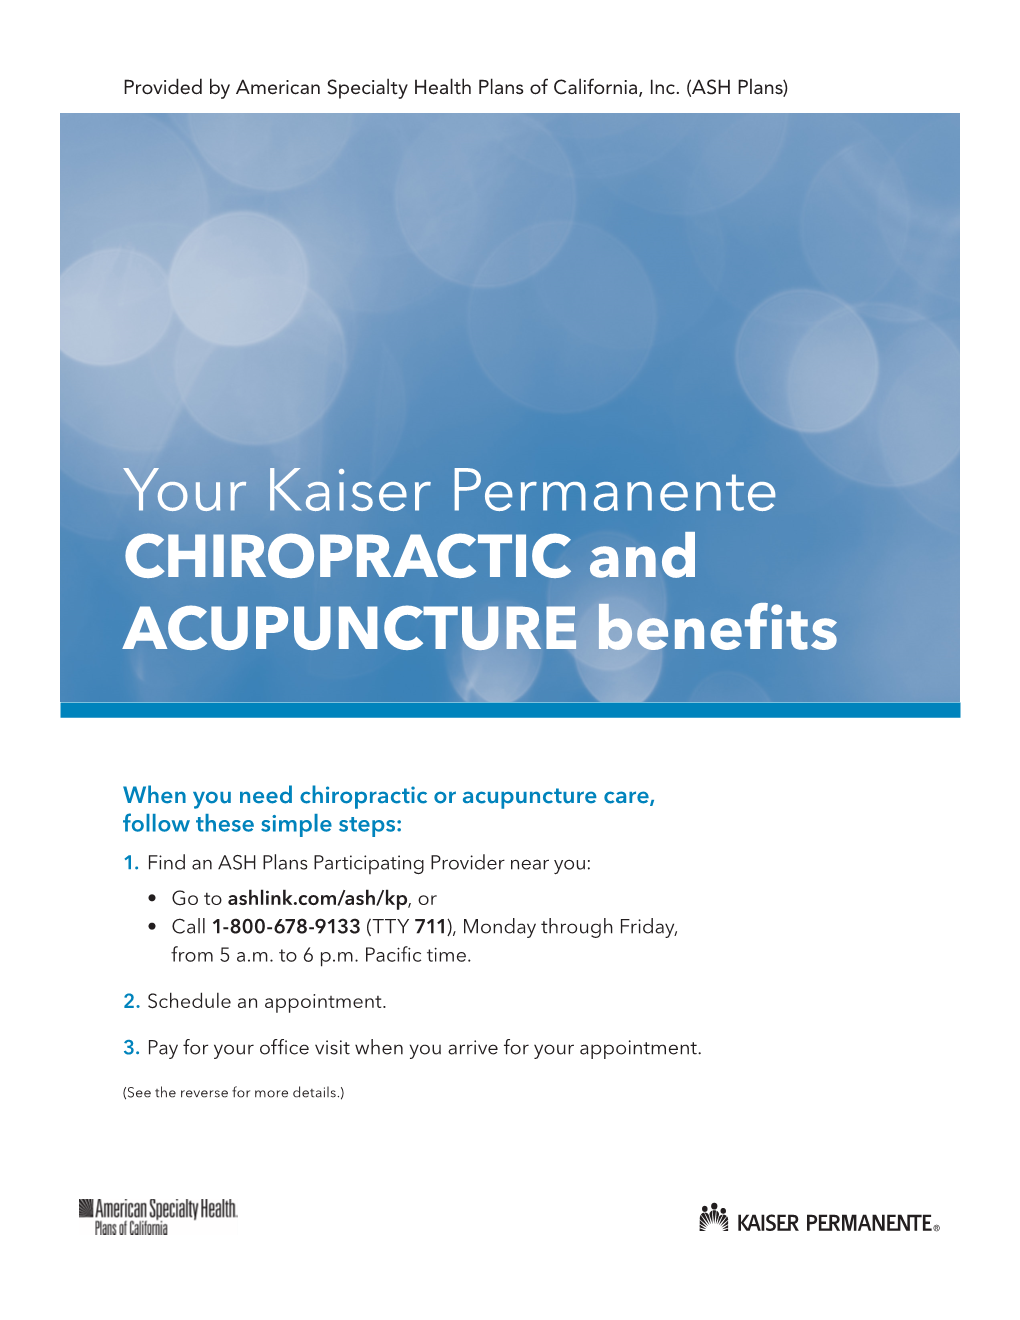 Your Kaiser Permanente CHIROPRACTIC and ACUPUNCTURE Benefits